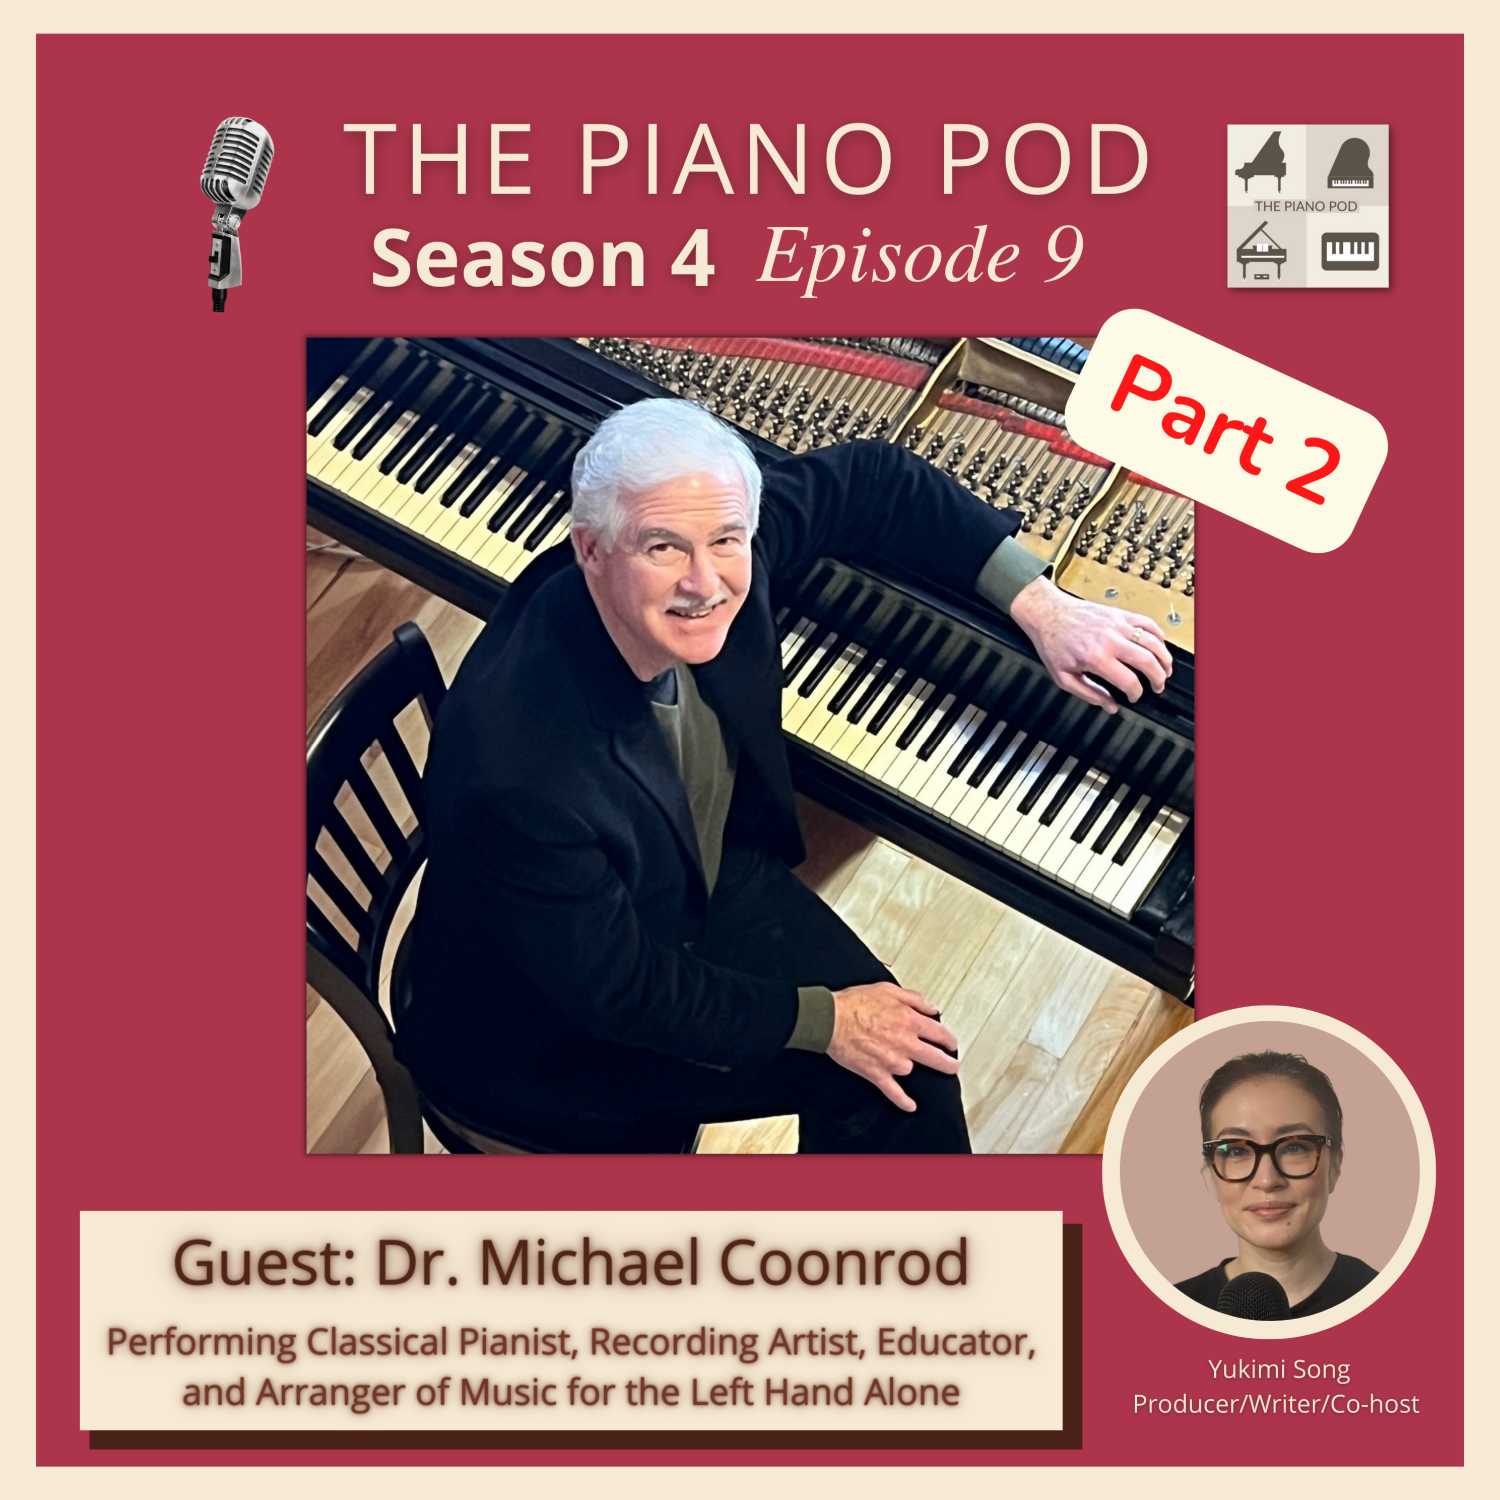 Part 2: Dr. Michael Coonrod -- Classical Pianist, Recording Artist, Educator, and Arranger specializing in music for the Left Hand Alone